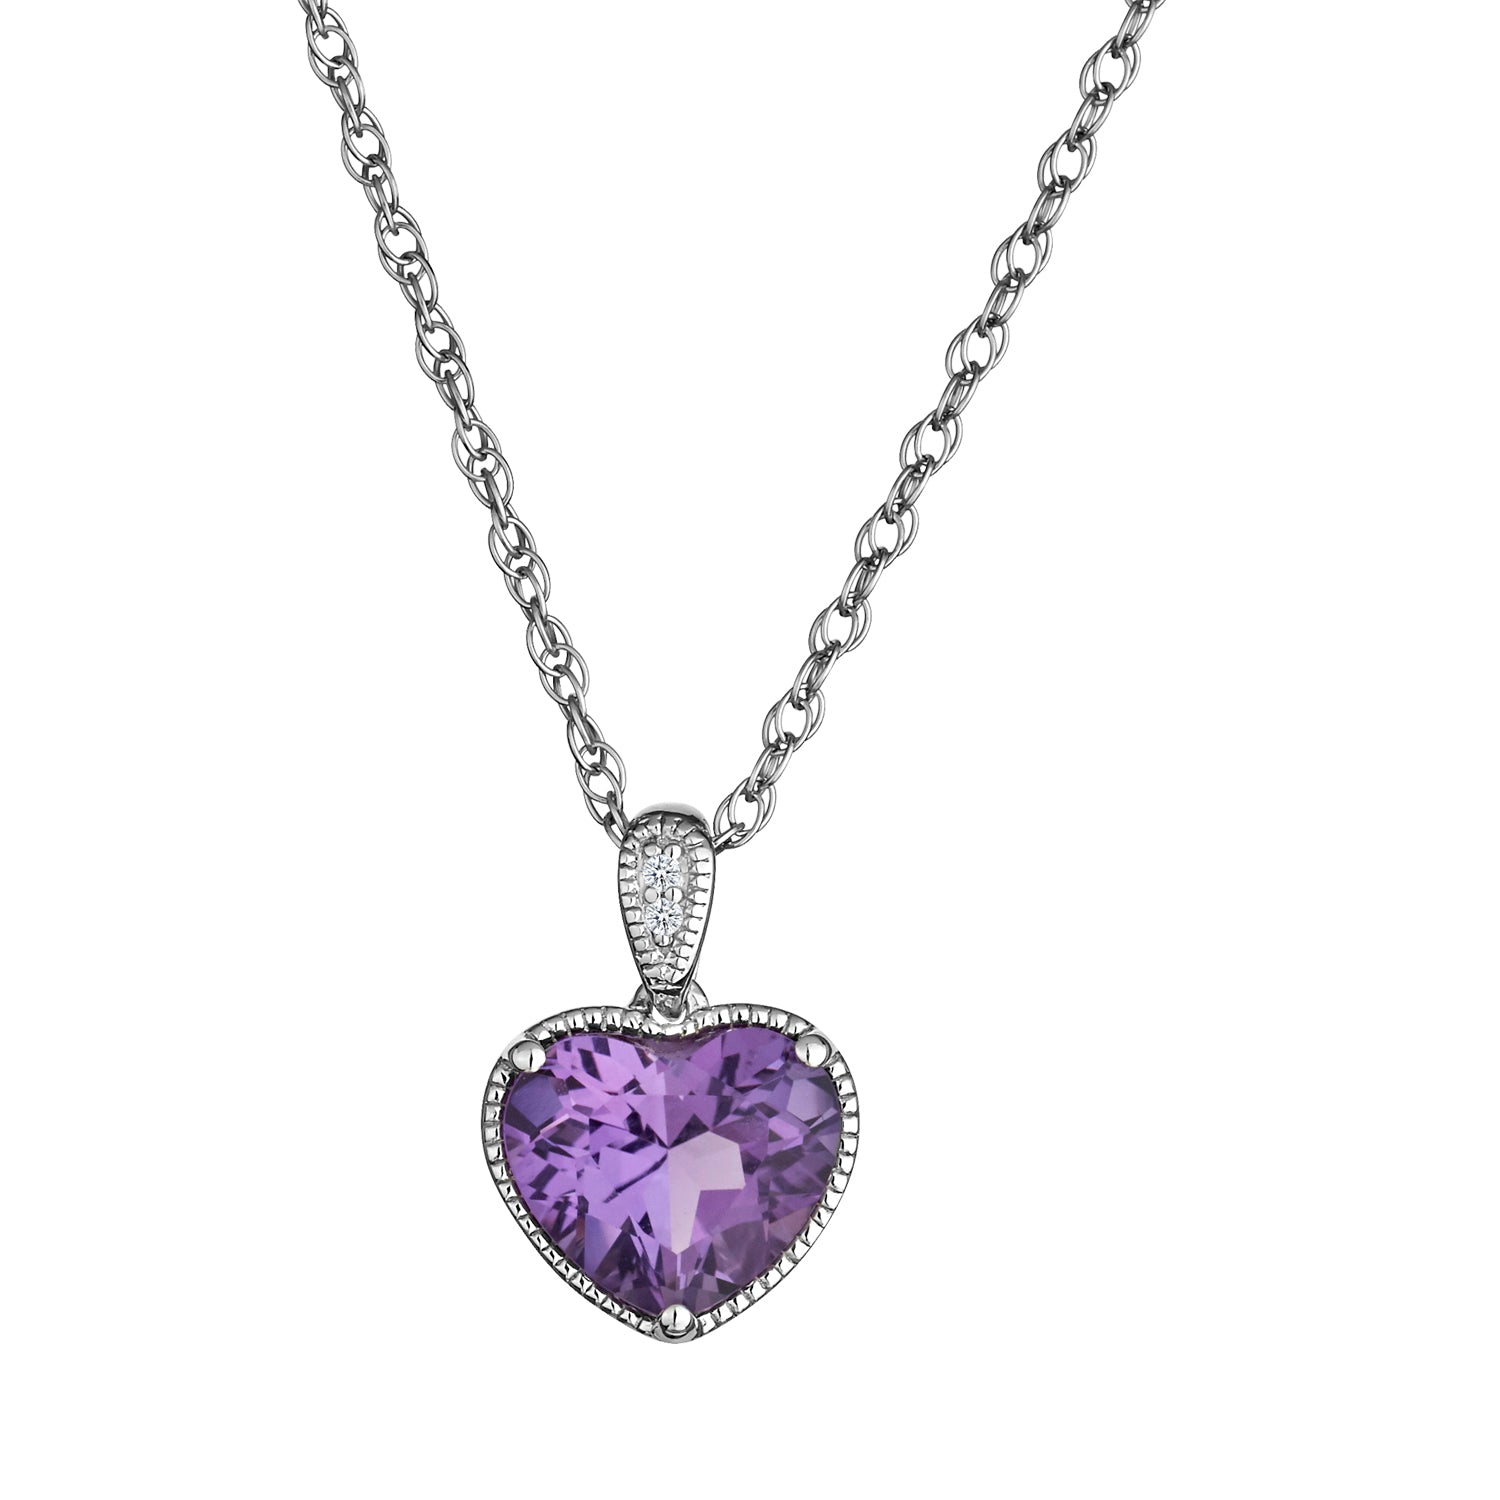 Amethyst & Created White Sapphire Heart Pendant,  Sterling Silver. Necklaces and Pendants. Griffin Jewellery Designs. 